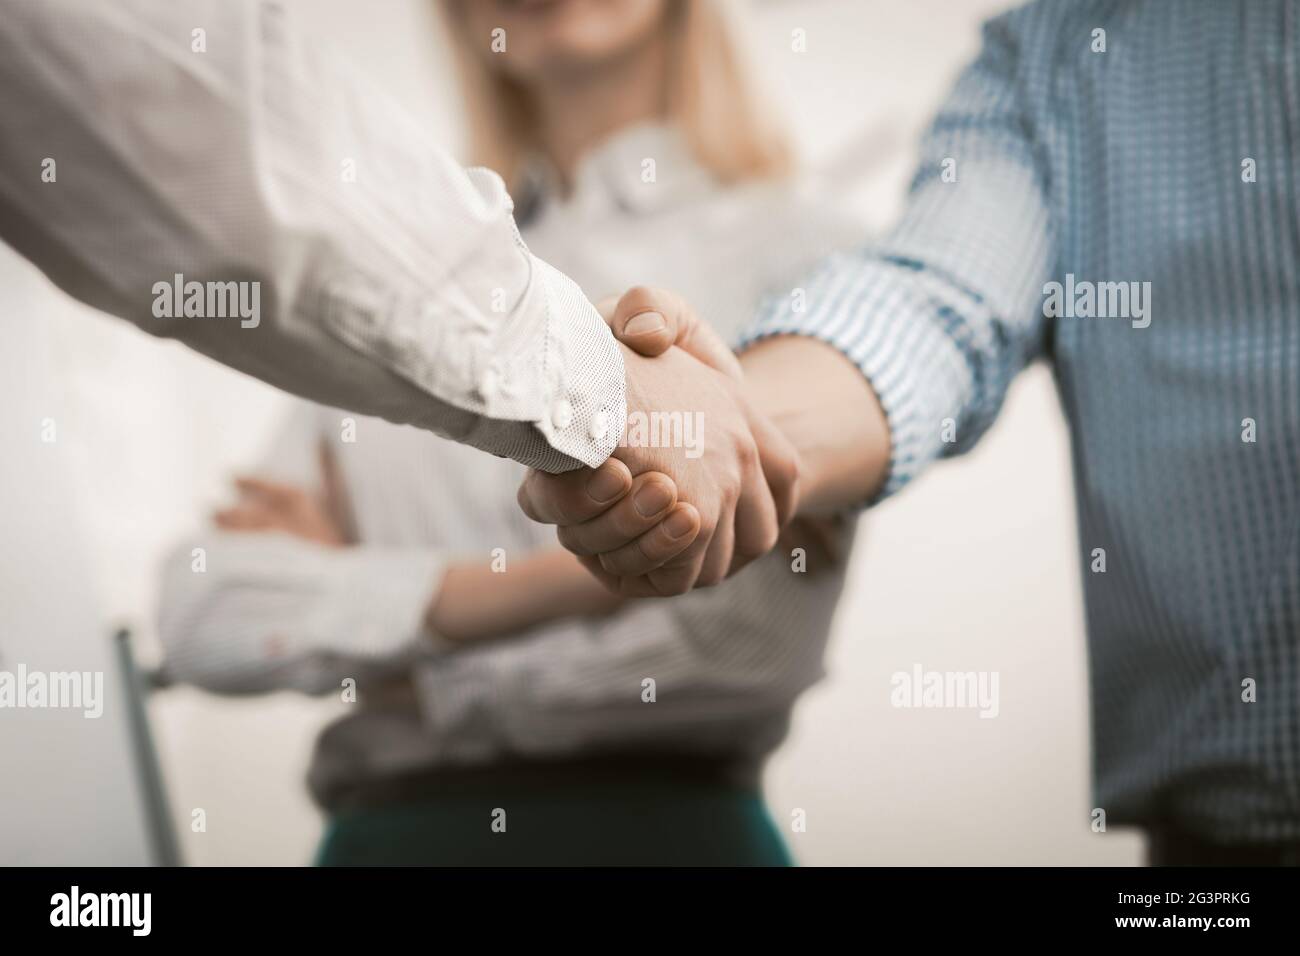 Handshake of businessmen. Two men in formalwear shaking hands in agreement at business meeting in office. Close up shot Stock Photo